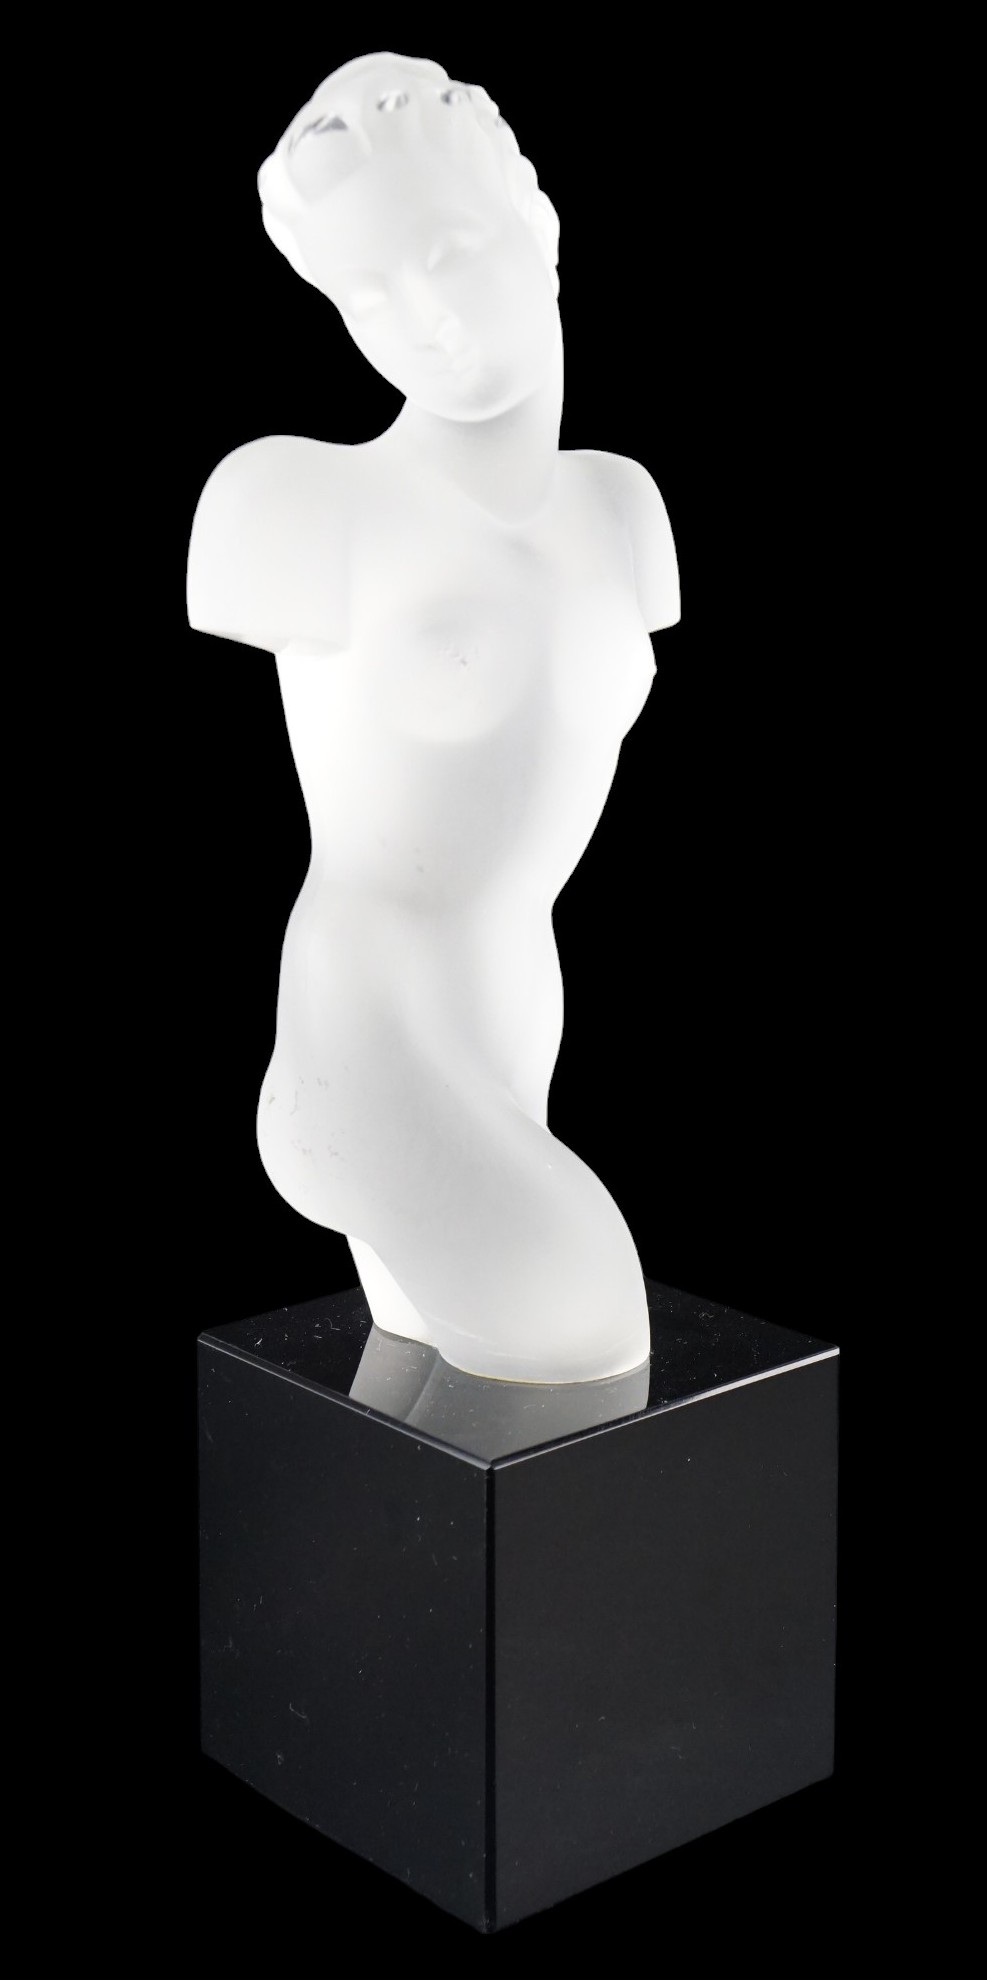 An Art Deco style frosted glass nude sculpture on a black glass plinth, 30 cm